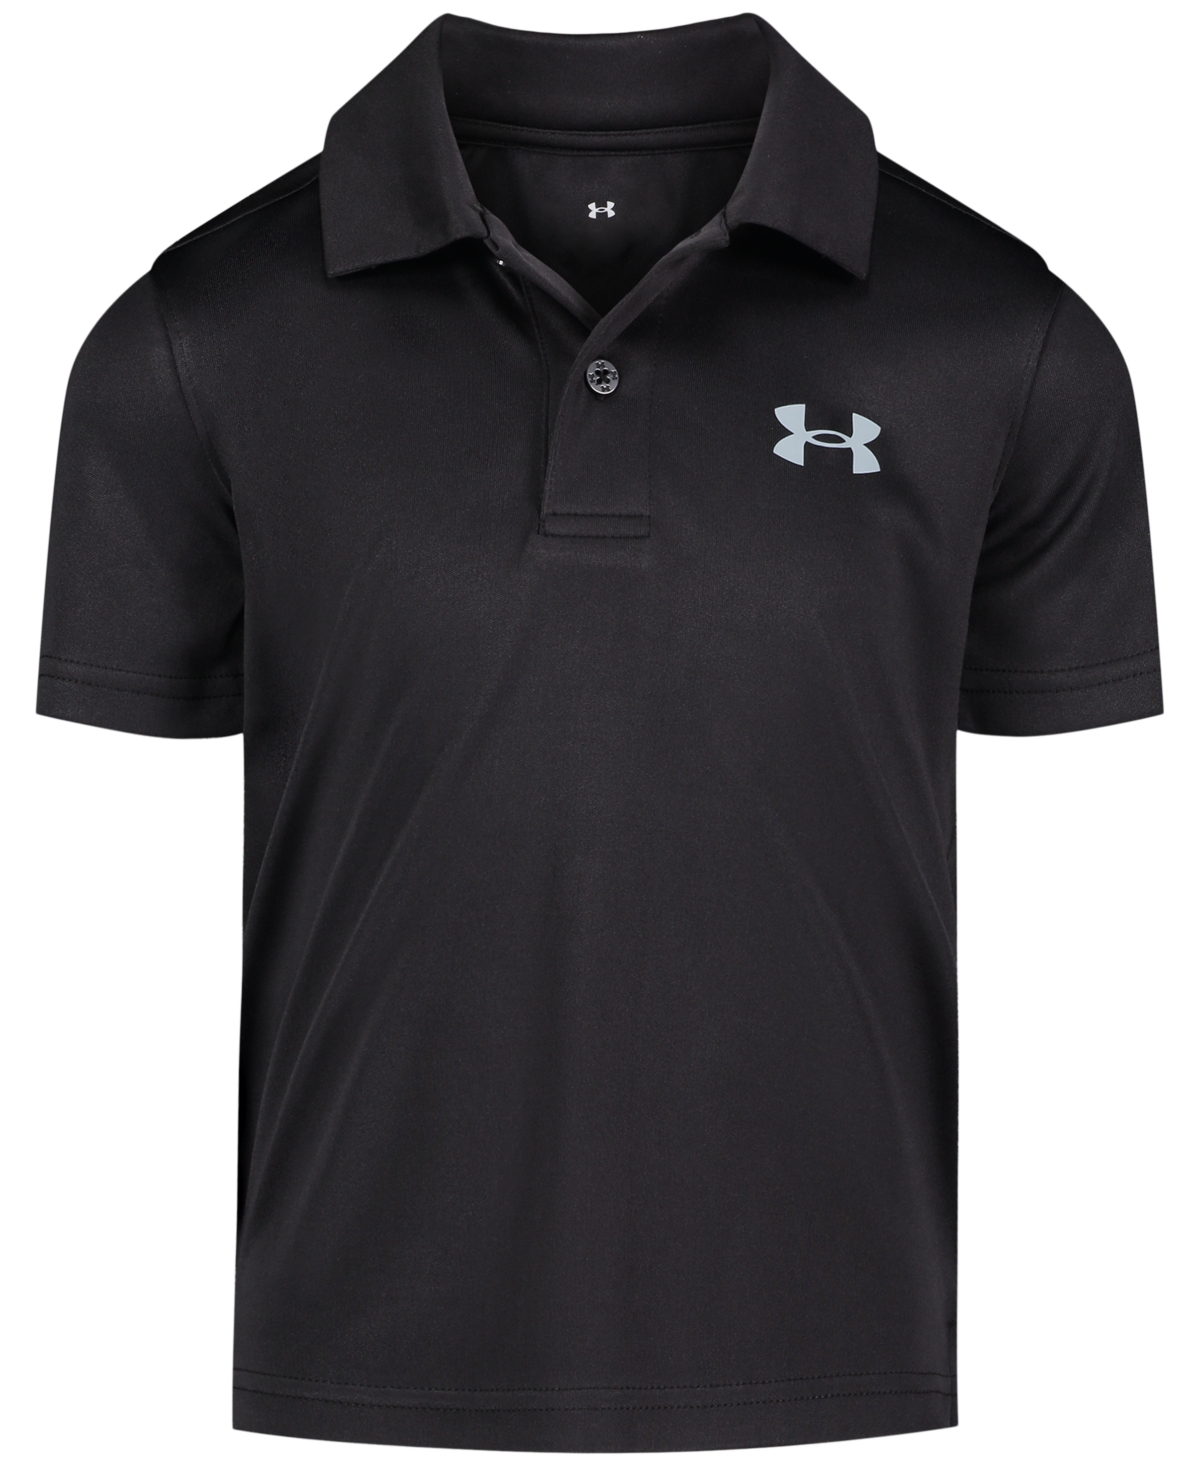 Under Armour Babies' Toddler Boys Matchplay Solid Polo Shirt In Black